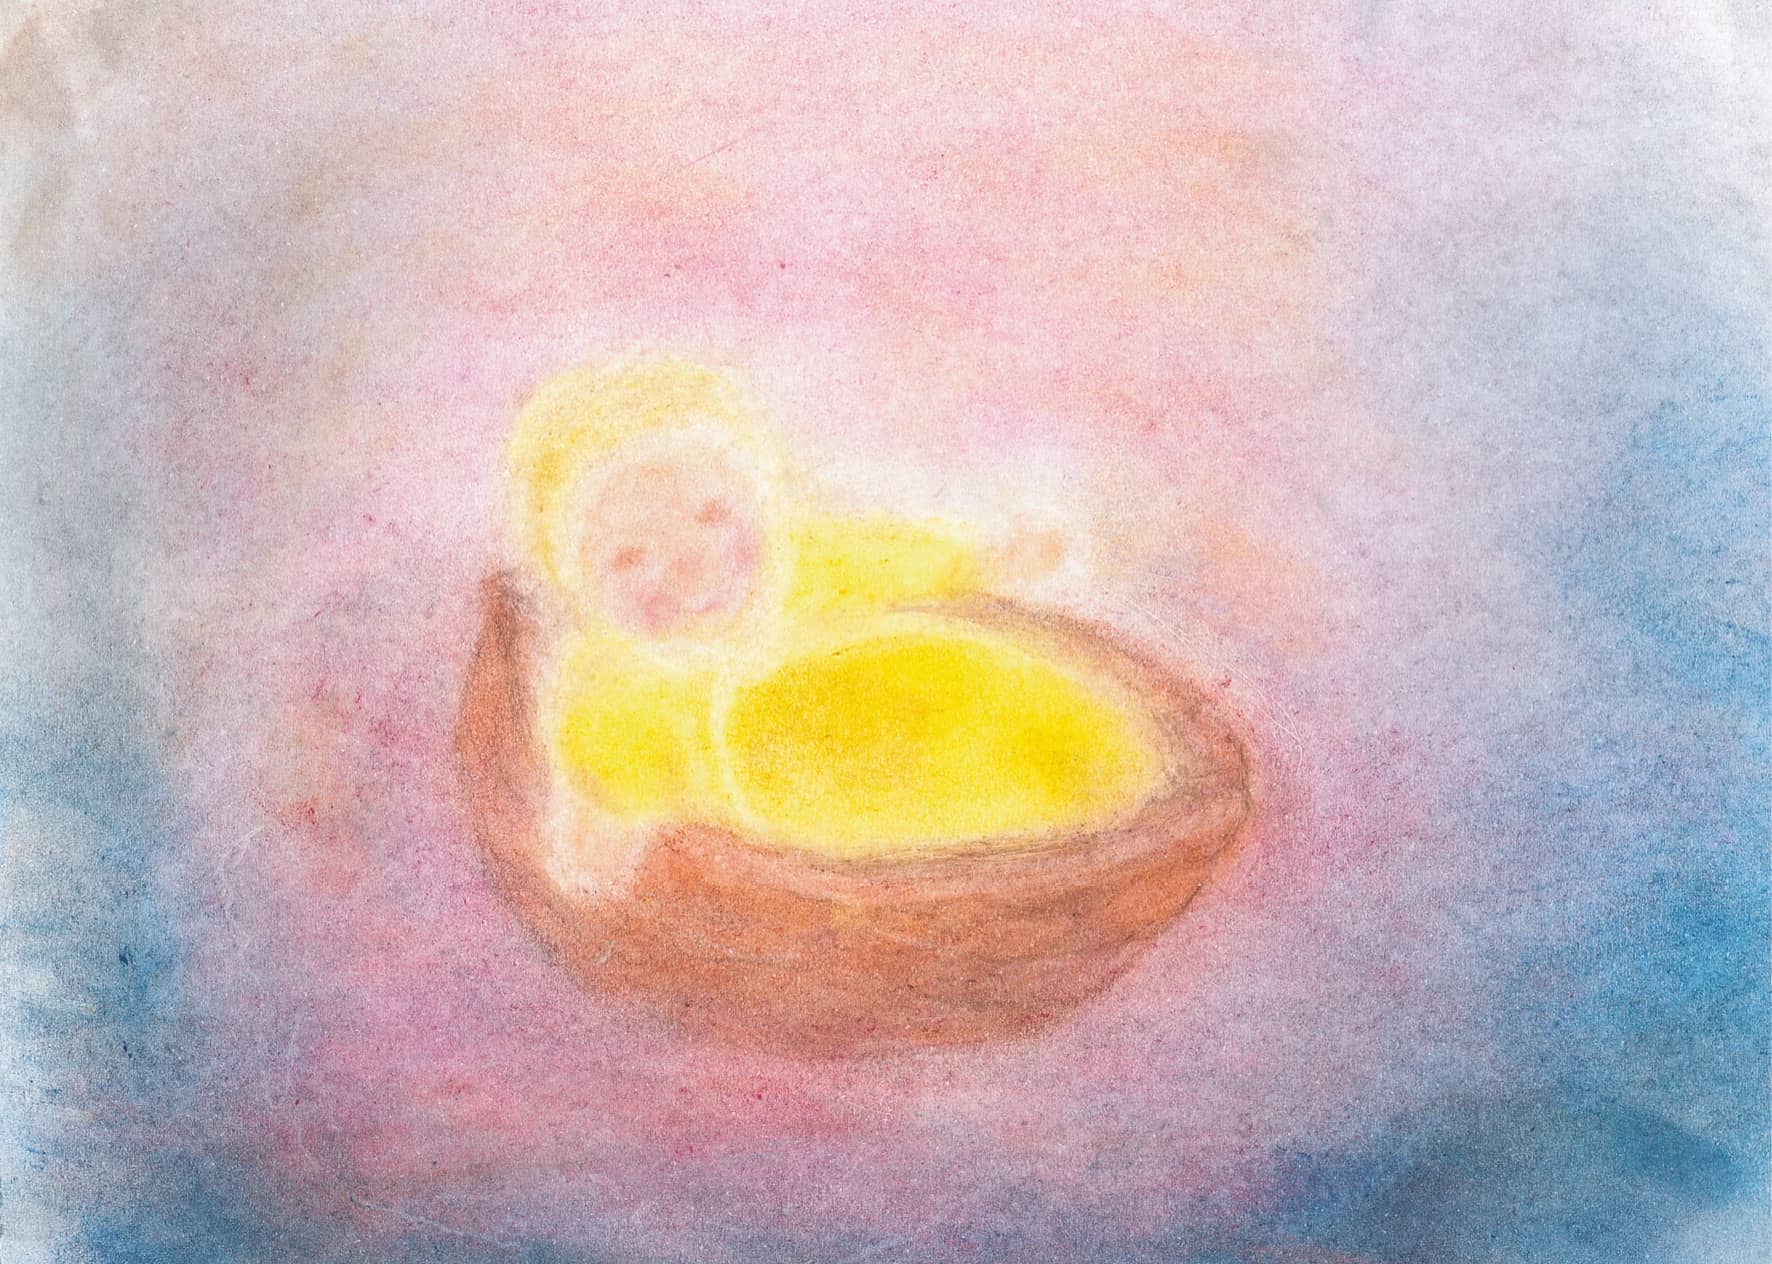 Seccorell postcard "On earth", bright motif with baby in cradle, soft color transitions, perfect for contemplative occasions.